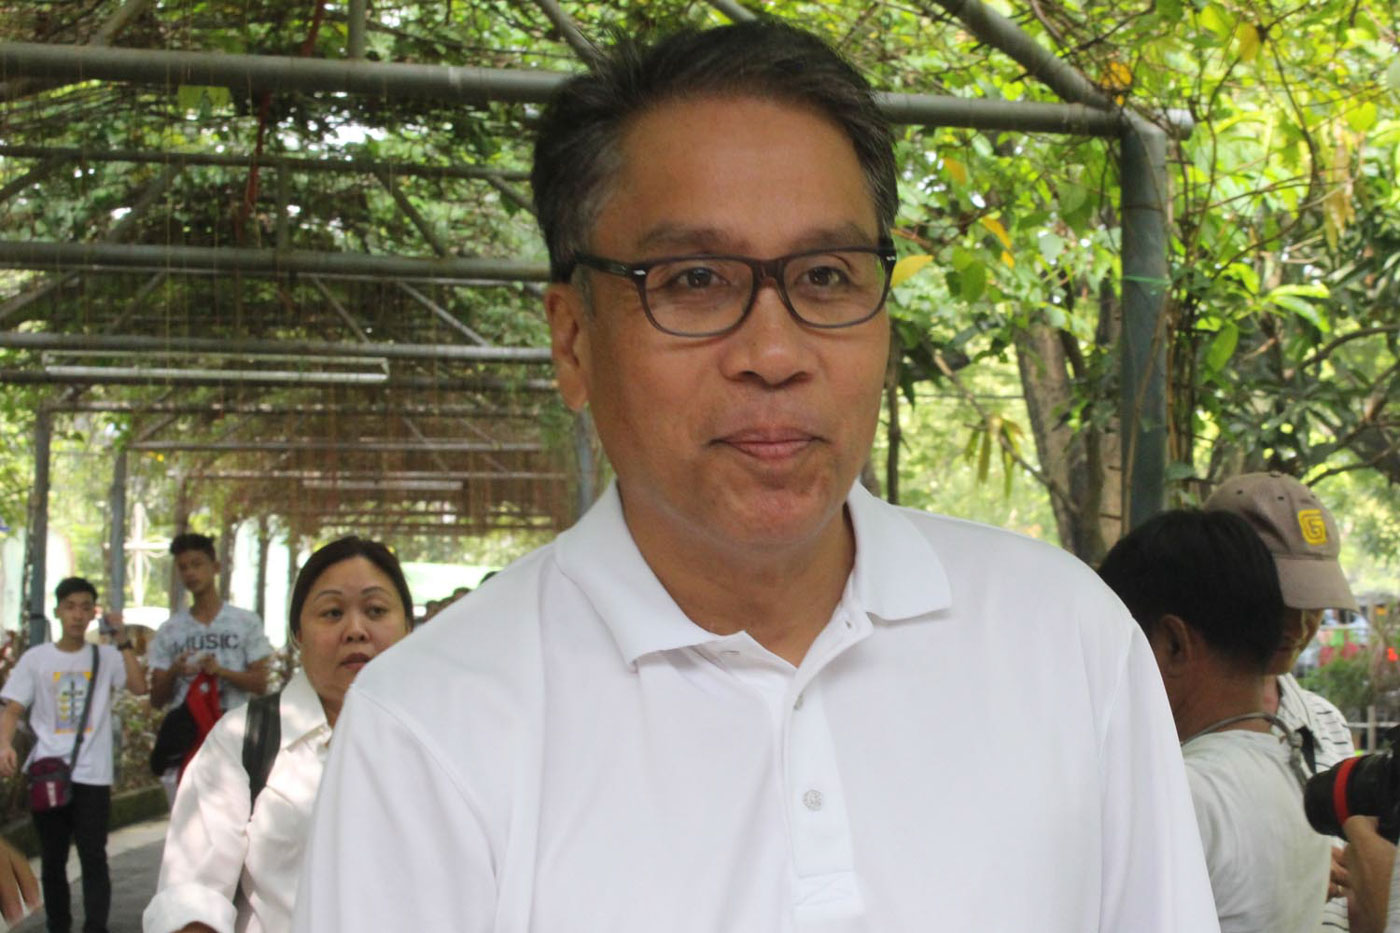 RETURN TO THE SENATE? Mar Roxas' party mates at the Liberal Party and other groups are urging him to consider another run for the Senate. File Photo by Darren Langit/Rappler   